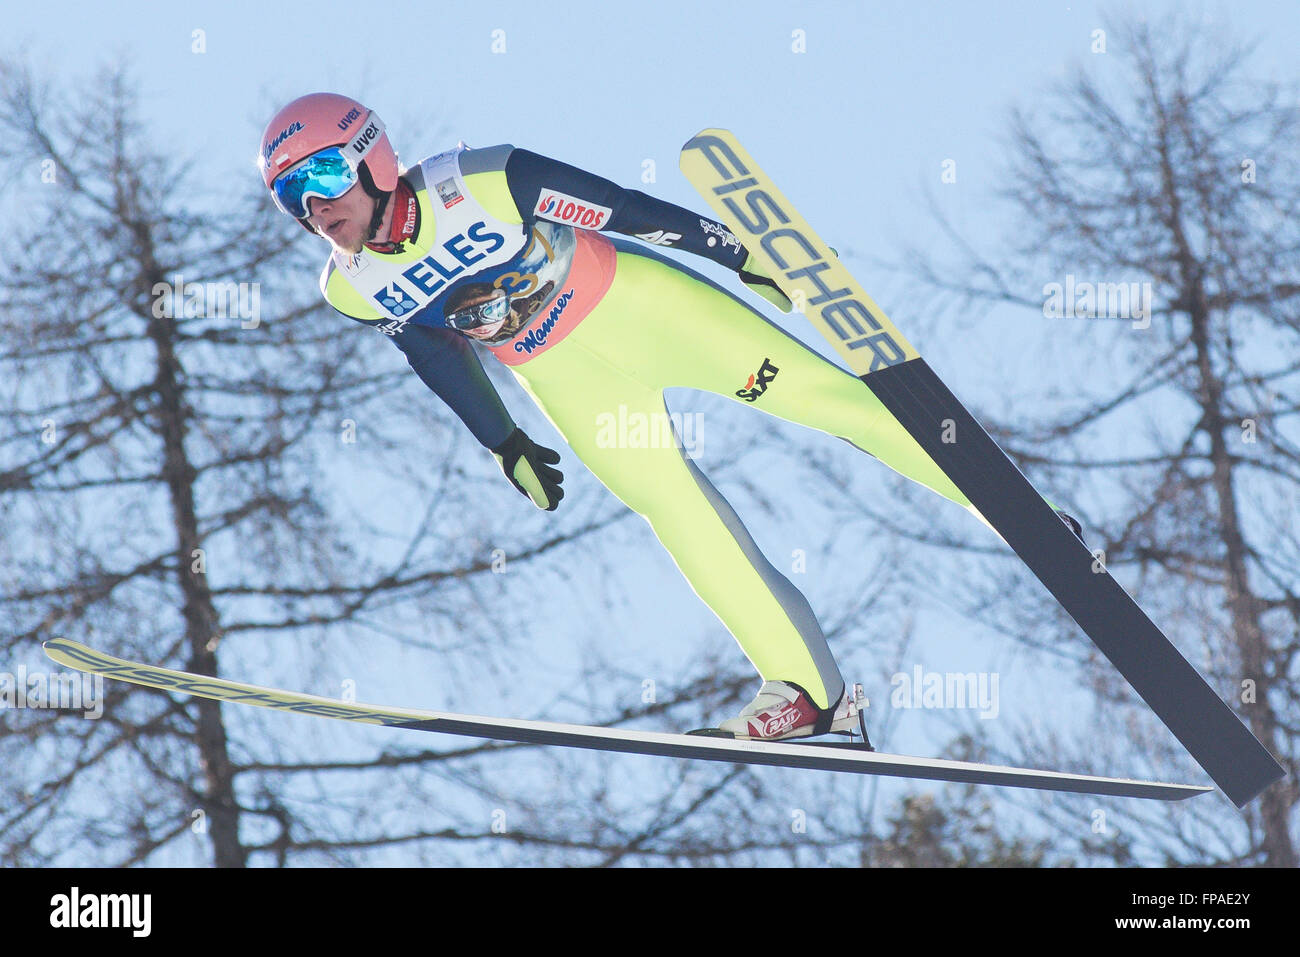 Planica, Slovenia. 18th Mar, 2016. Dawid Kubacki of Poland competes during Planica FIS Ski Jumping World Cup finals on the March 18, 2016 in Planica, Slovenia. © Rok Rakun/Pacific Press/Alamy Live News Stock Photo